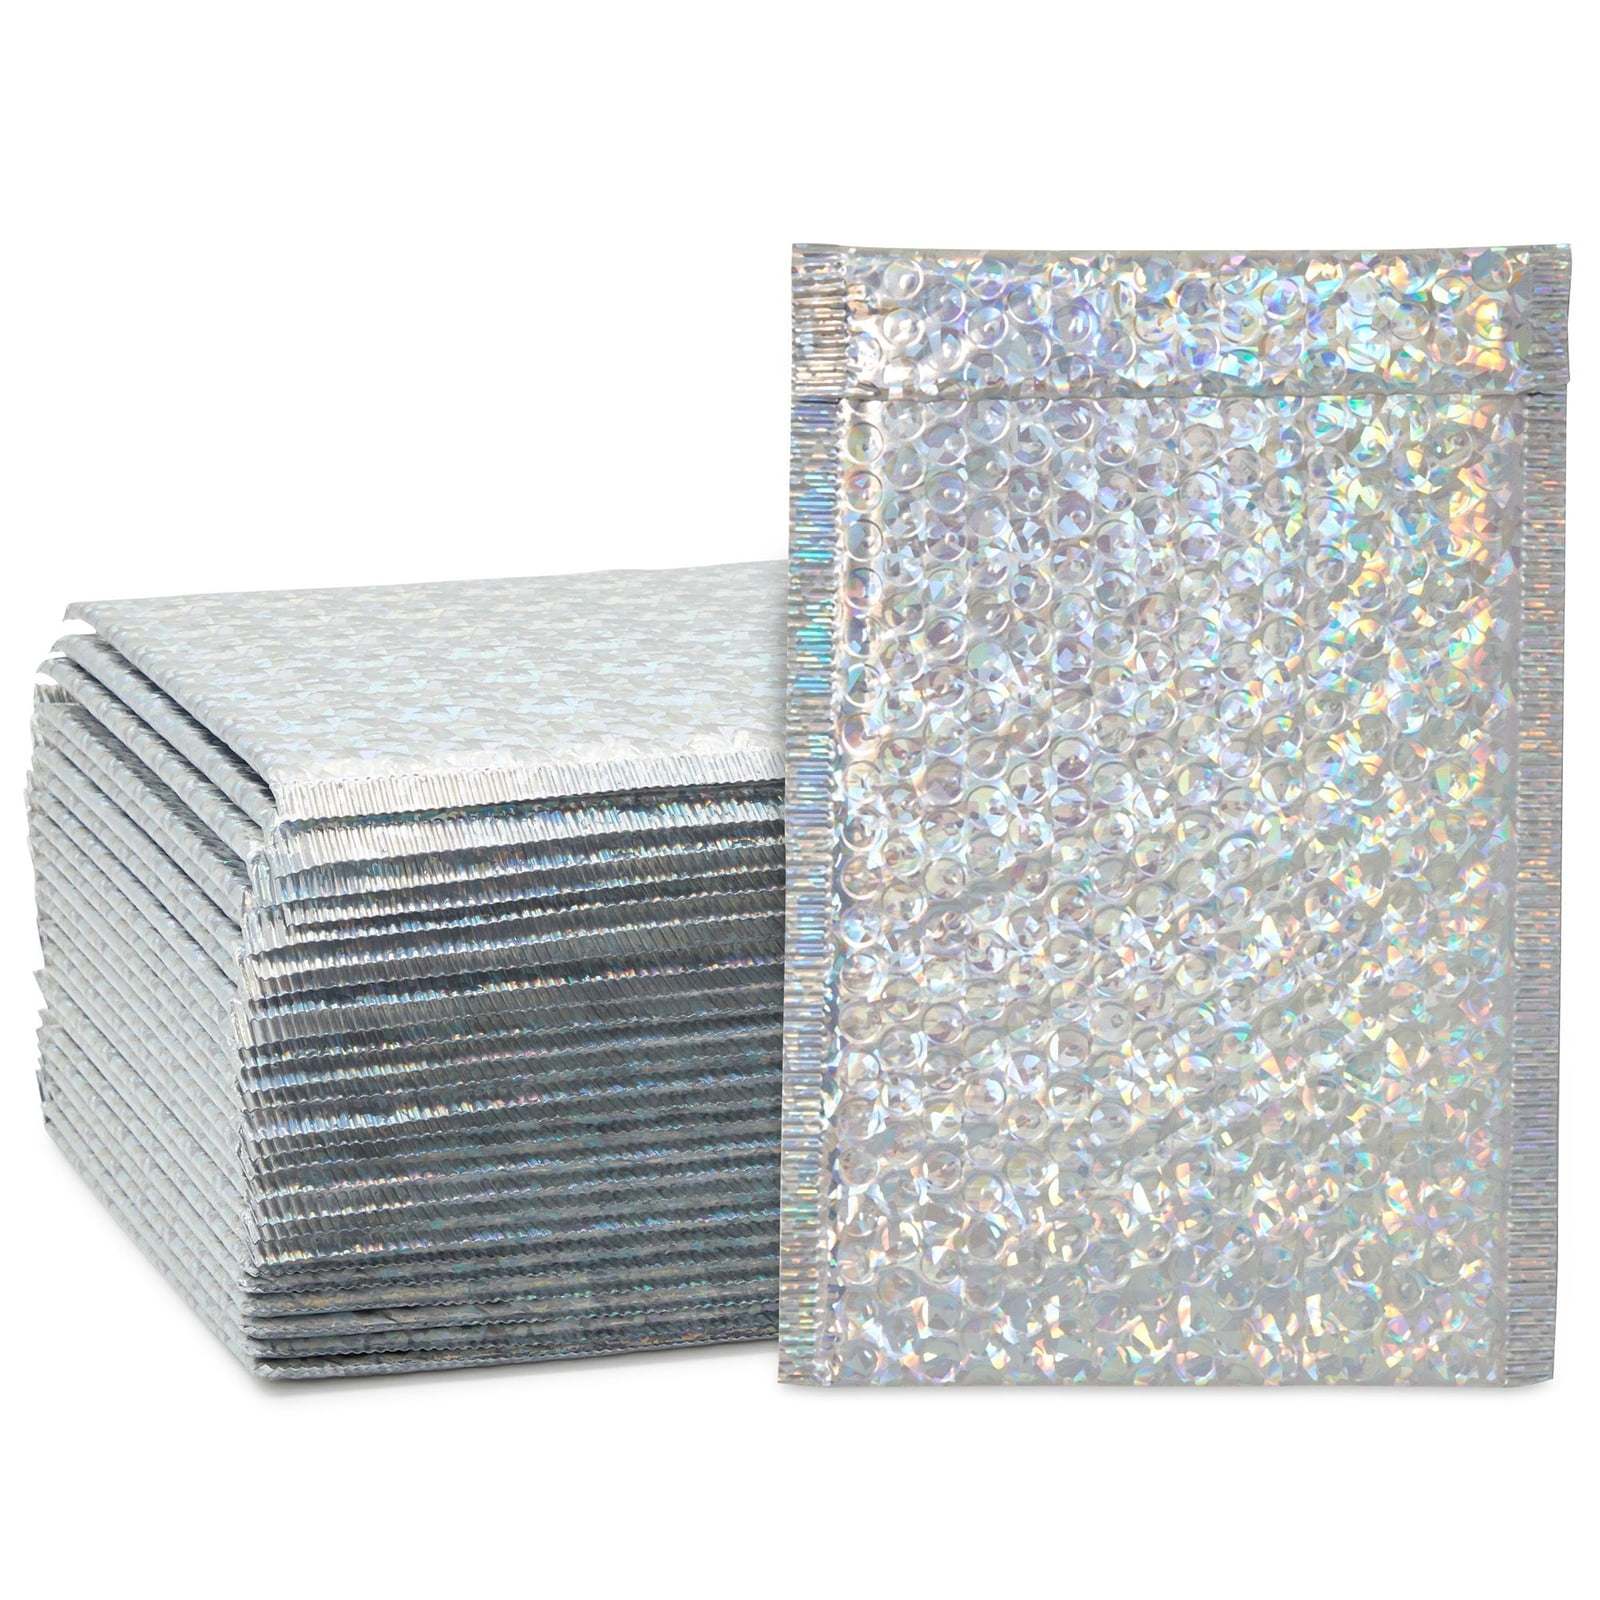 Metallic Silver Holographic Bubble Padded Mailing Envelopes Bags Mixed Size's 